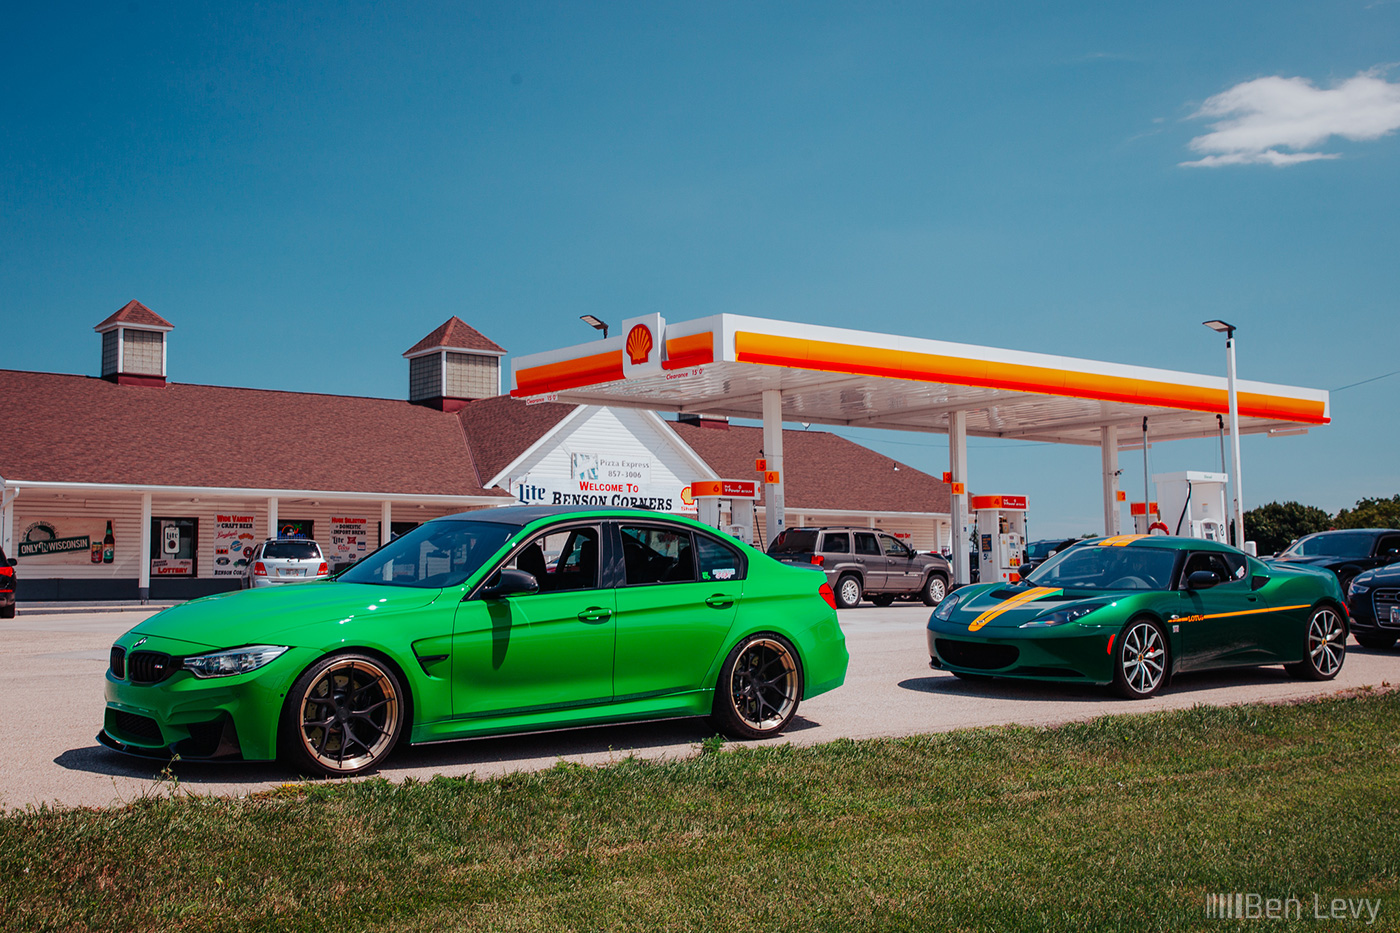 Green M3 and Lotus Evora at a Shell Gas Station